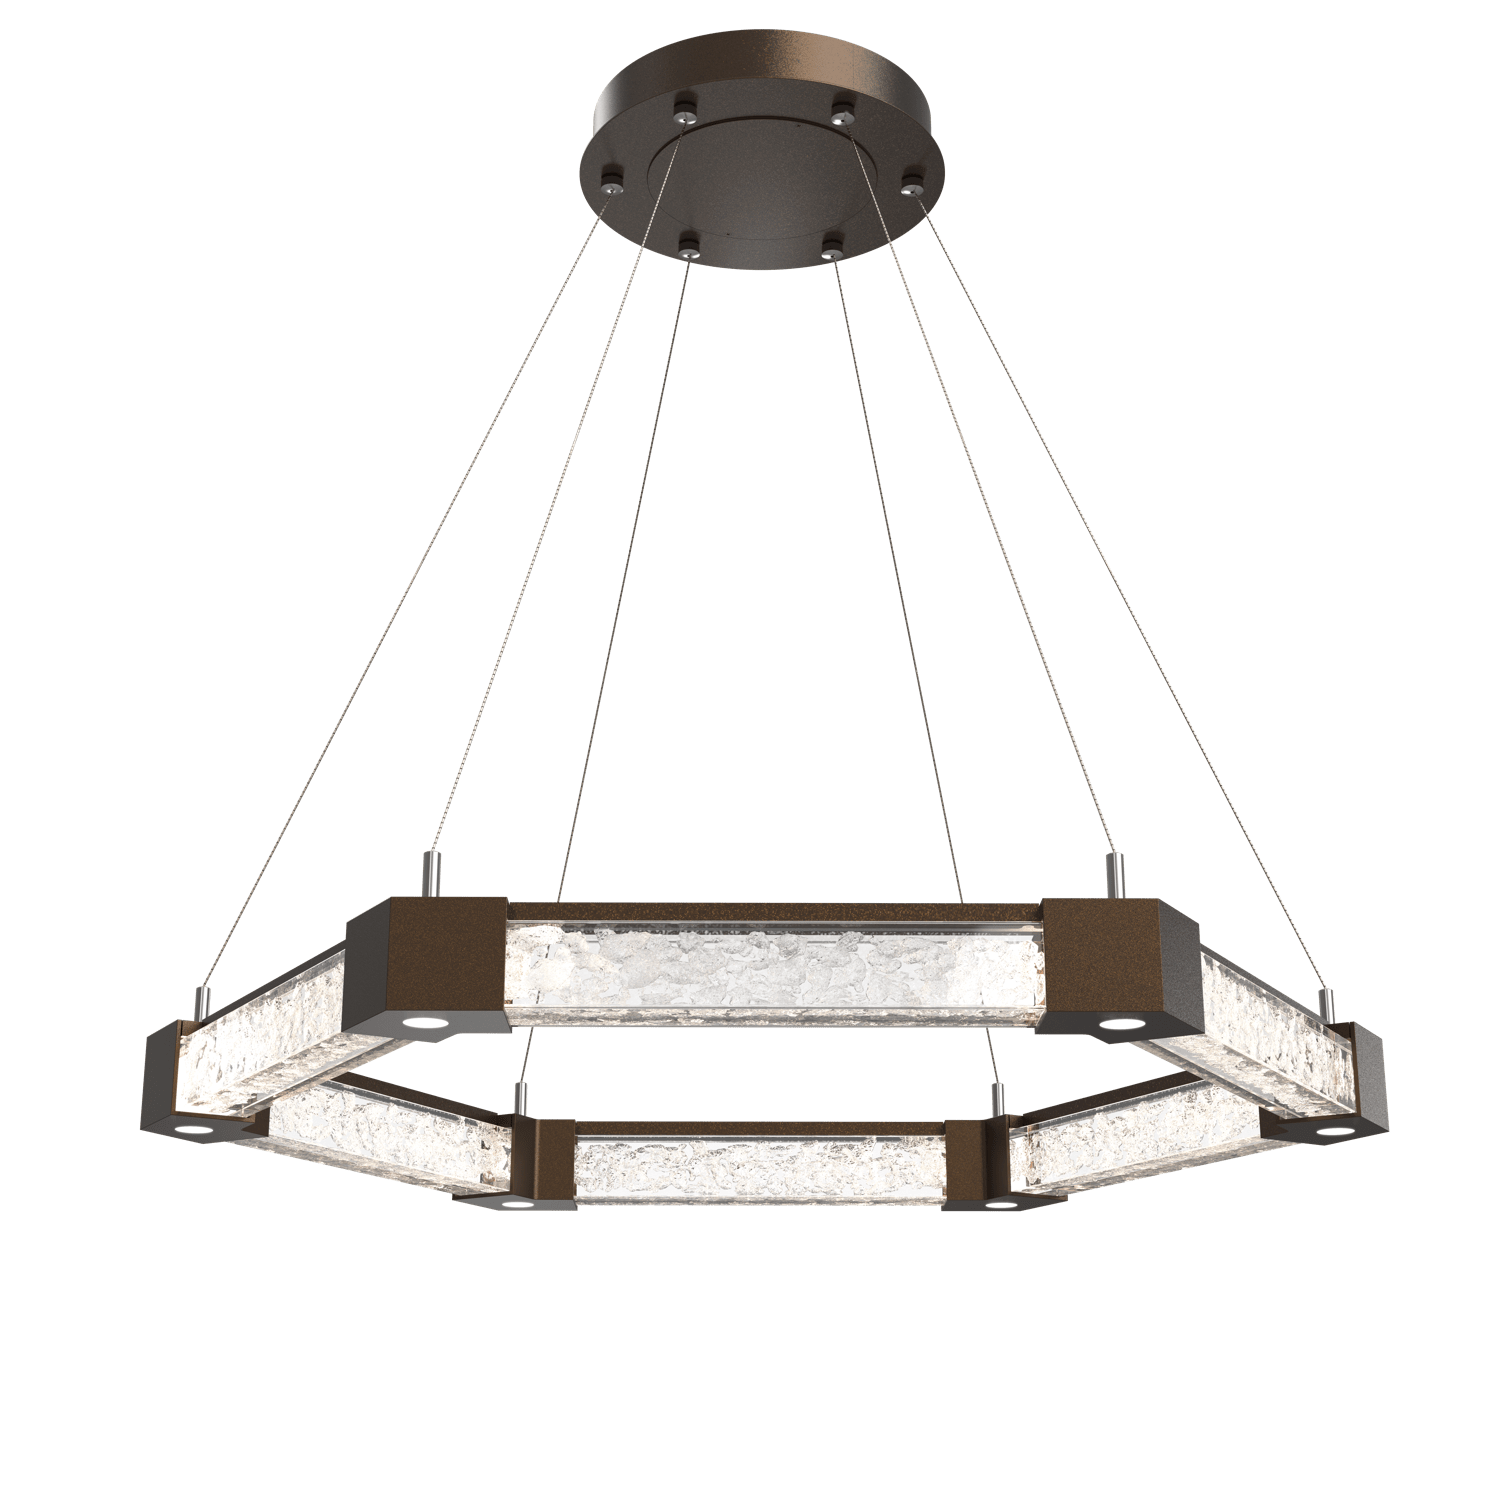 CHB0060-35-FB-GC-Hammerton-Studio-Axis-Hexagonal-Ring-Chandelier-with-Flat-Bronze-finish-and-clear-cast-glass-and-LED-lamping